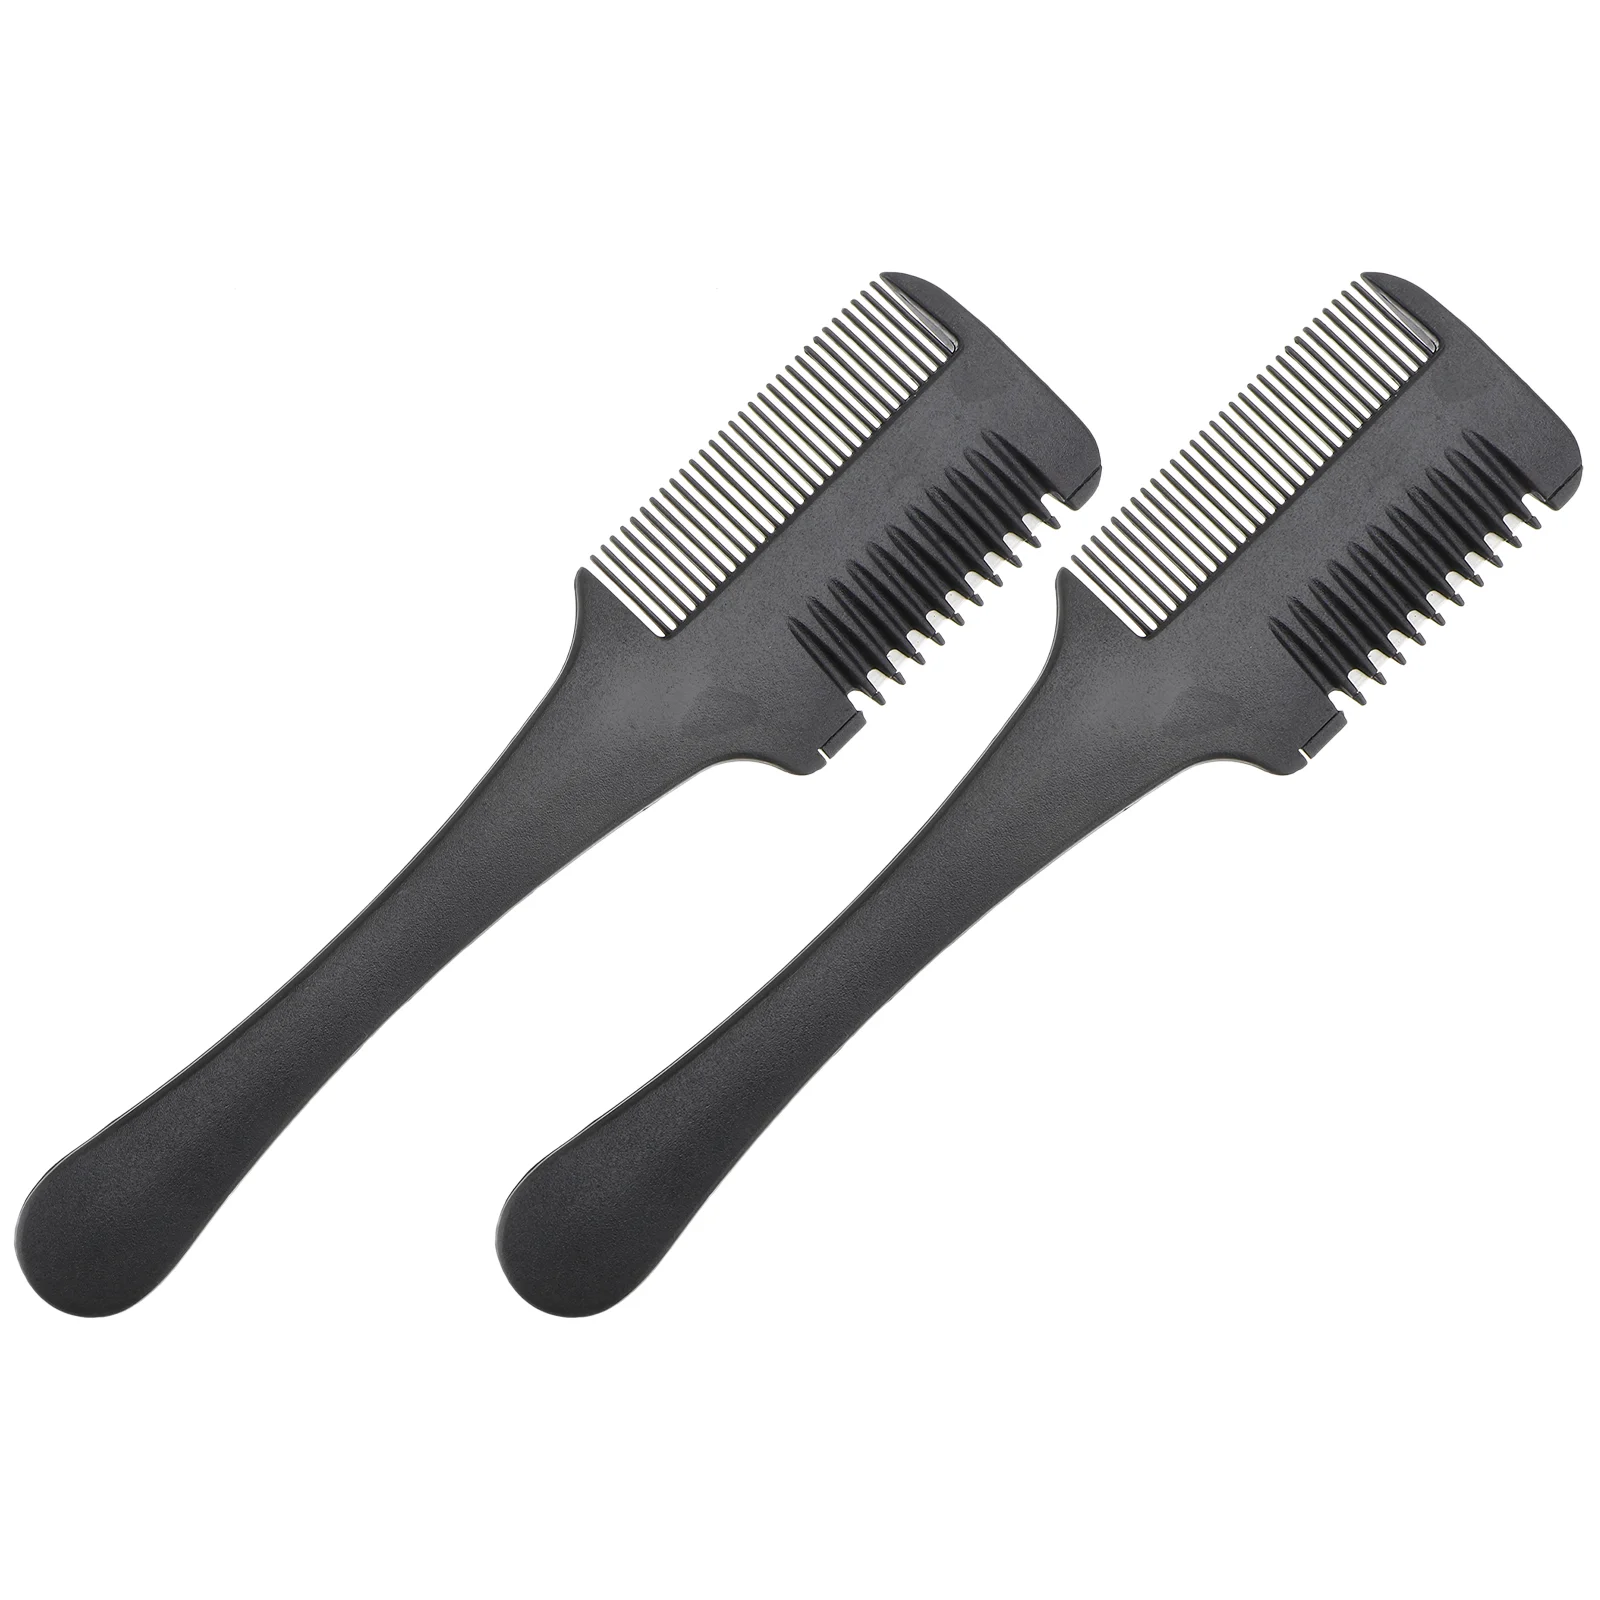 

Hair Combthinningcutting Men Women Combs Trimmerstyling Thinner Double Barber Hairdresser Fine Sidedrazors Hairdressing Haircut